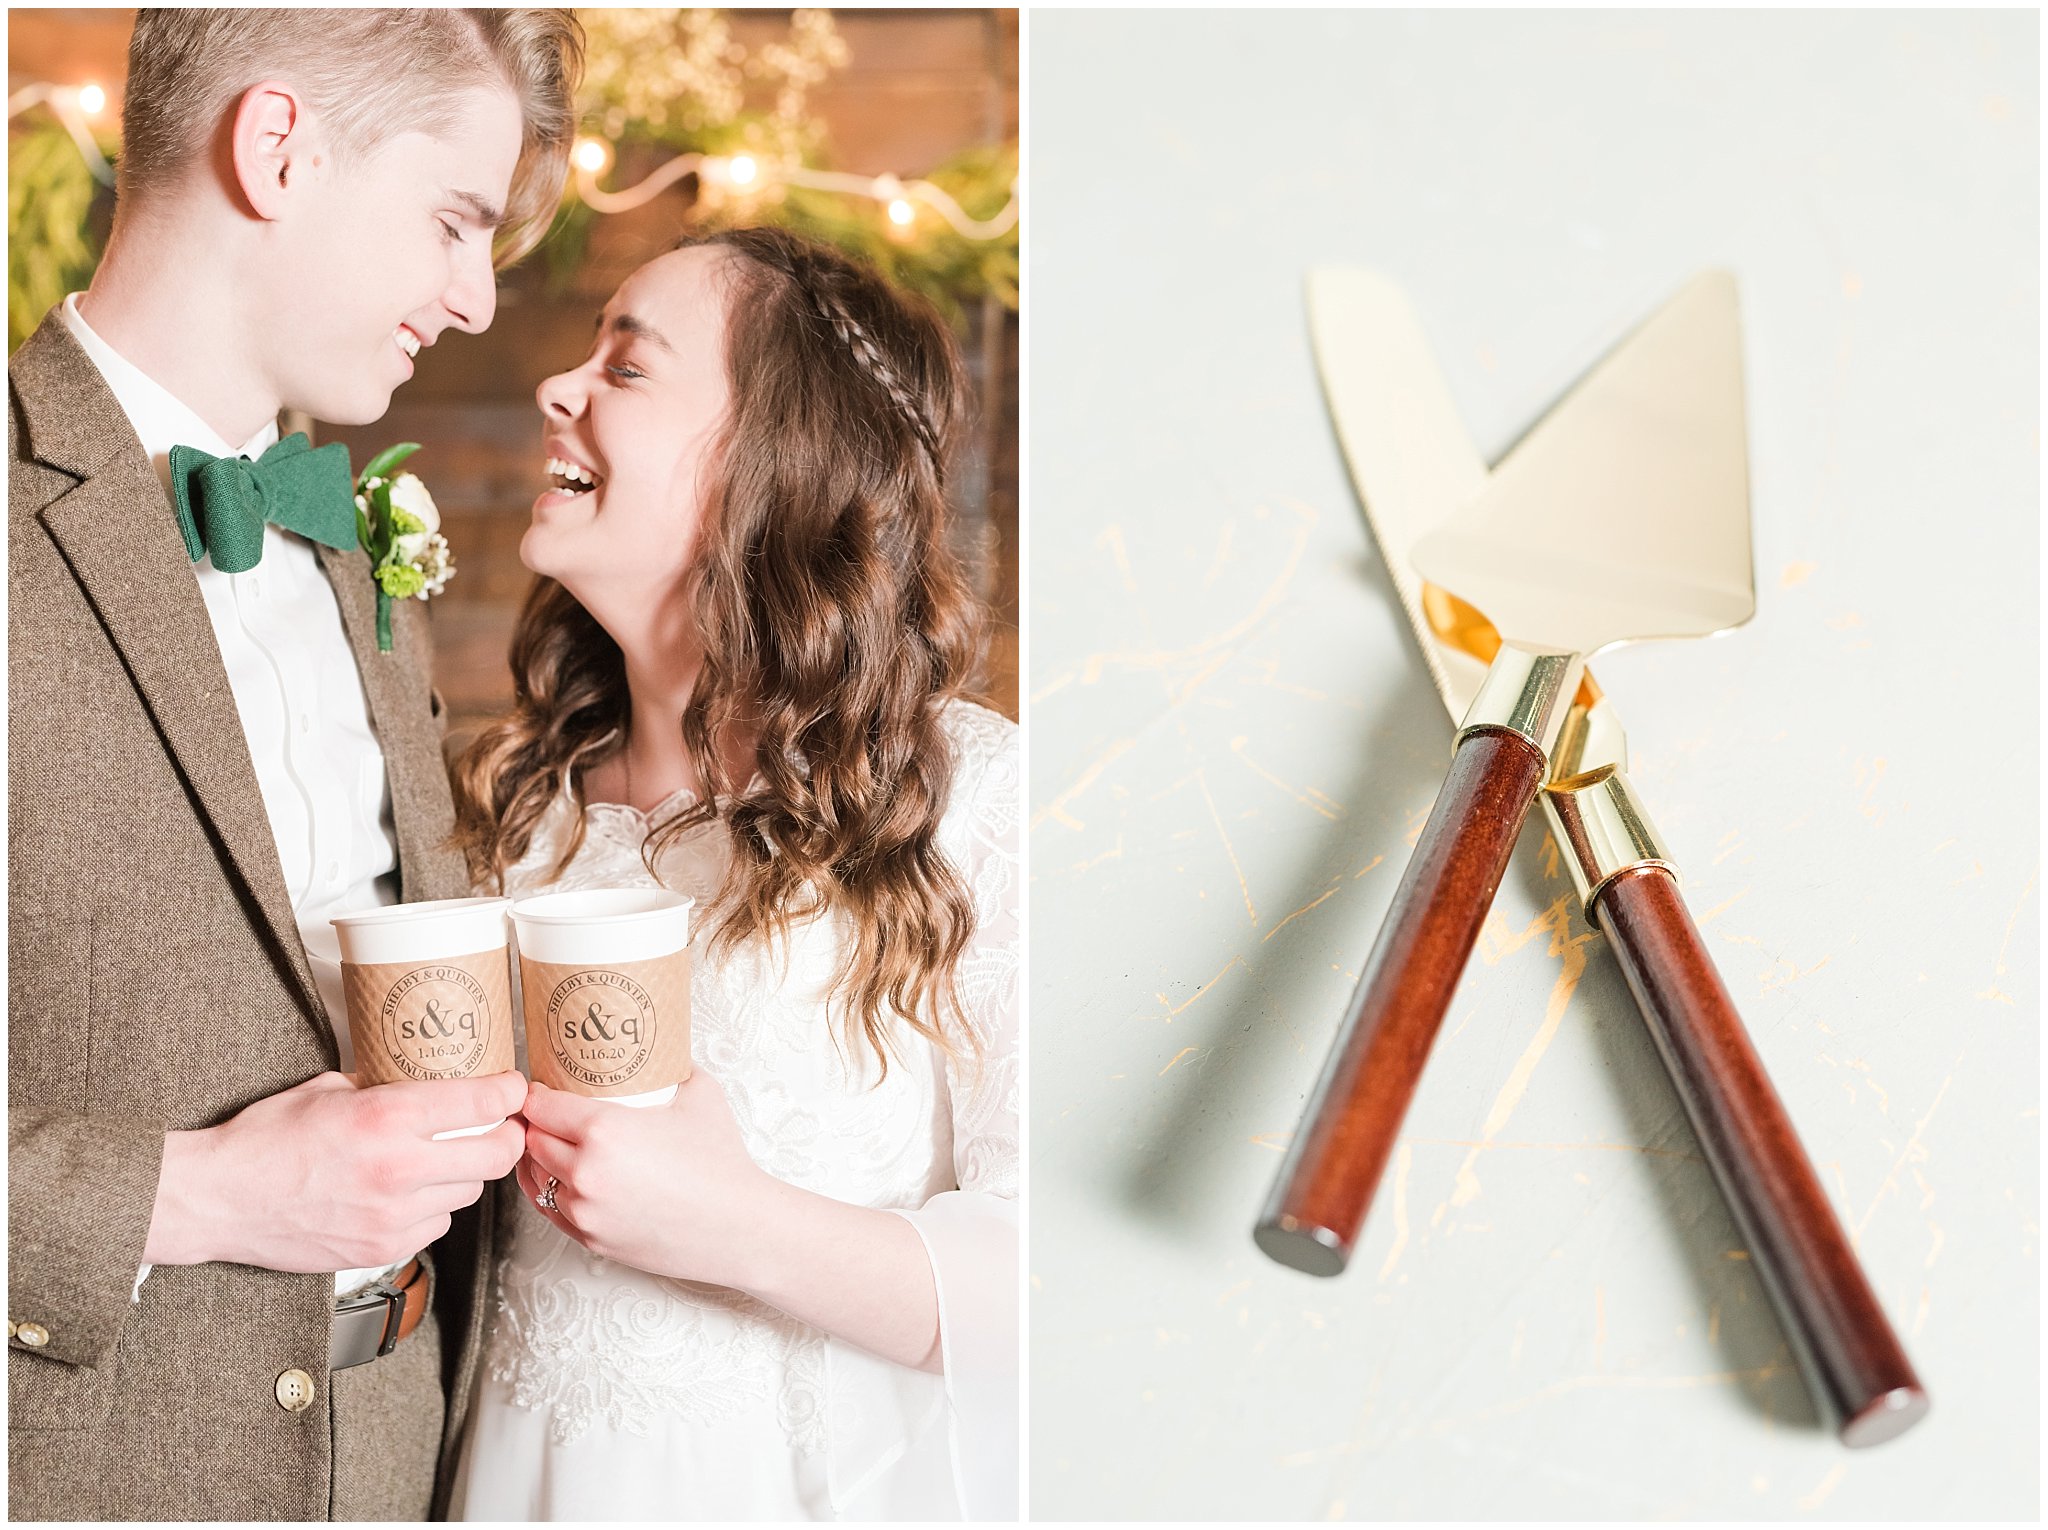 Bride and groom holding monogramed hot chocolate or coffee cups during reception at Sweet Magnolia Venues | Brown, Emerald Green, and white wedding | Ogden Temple and Sweet Magnolia Wedding | Jessie and Dallin Photography